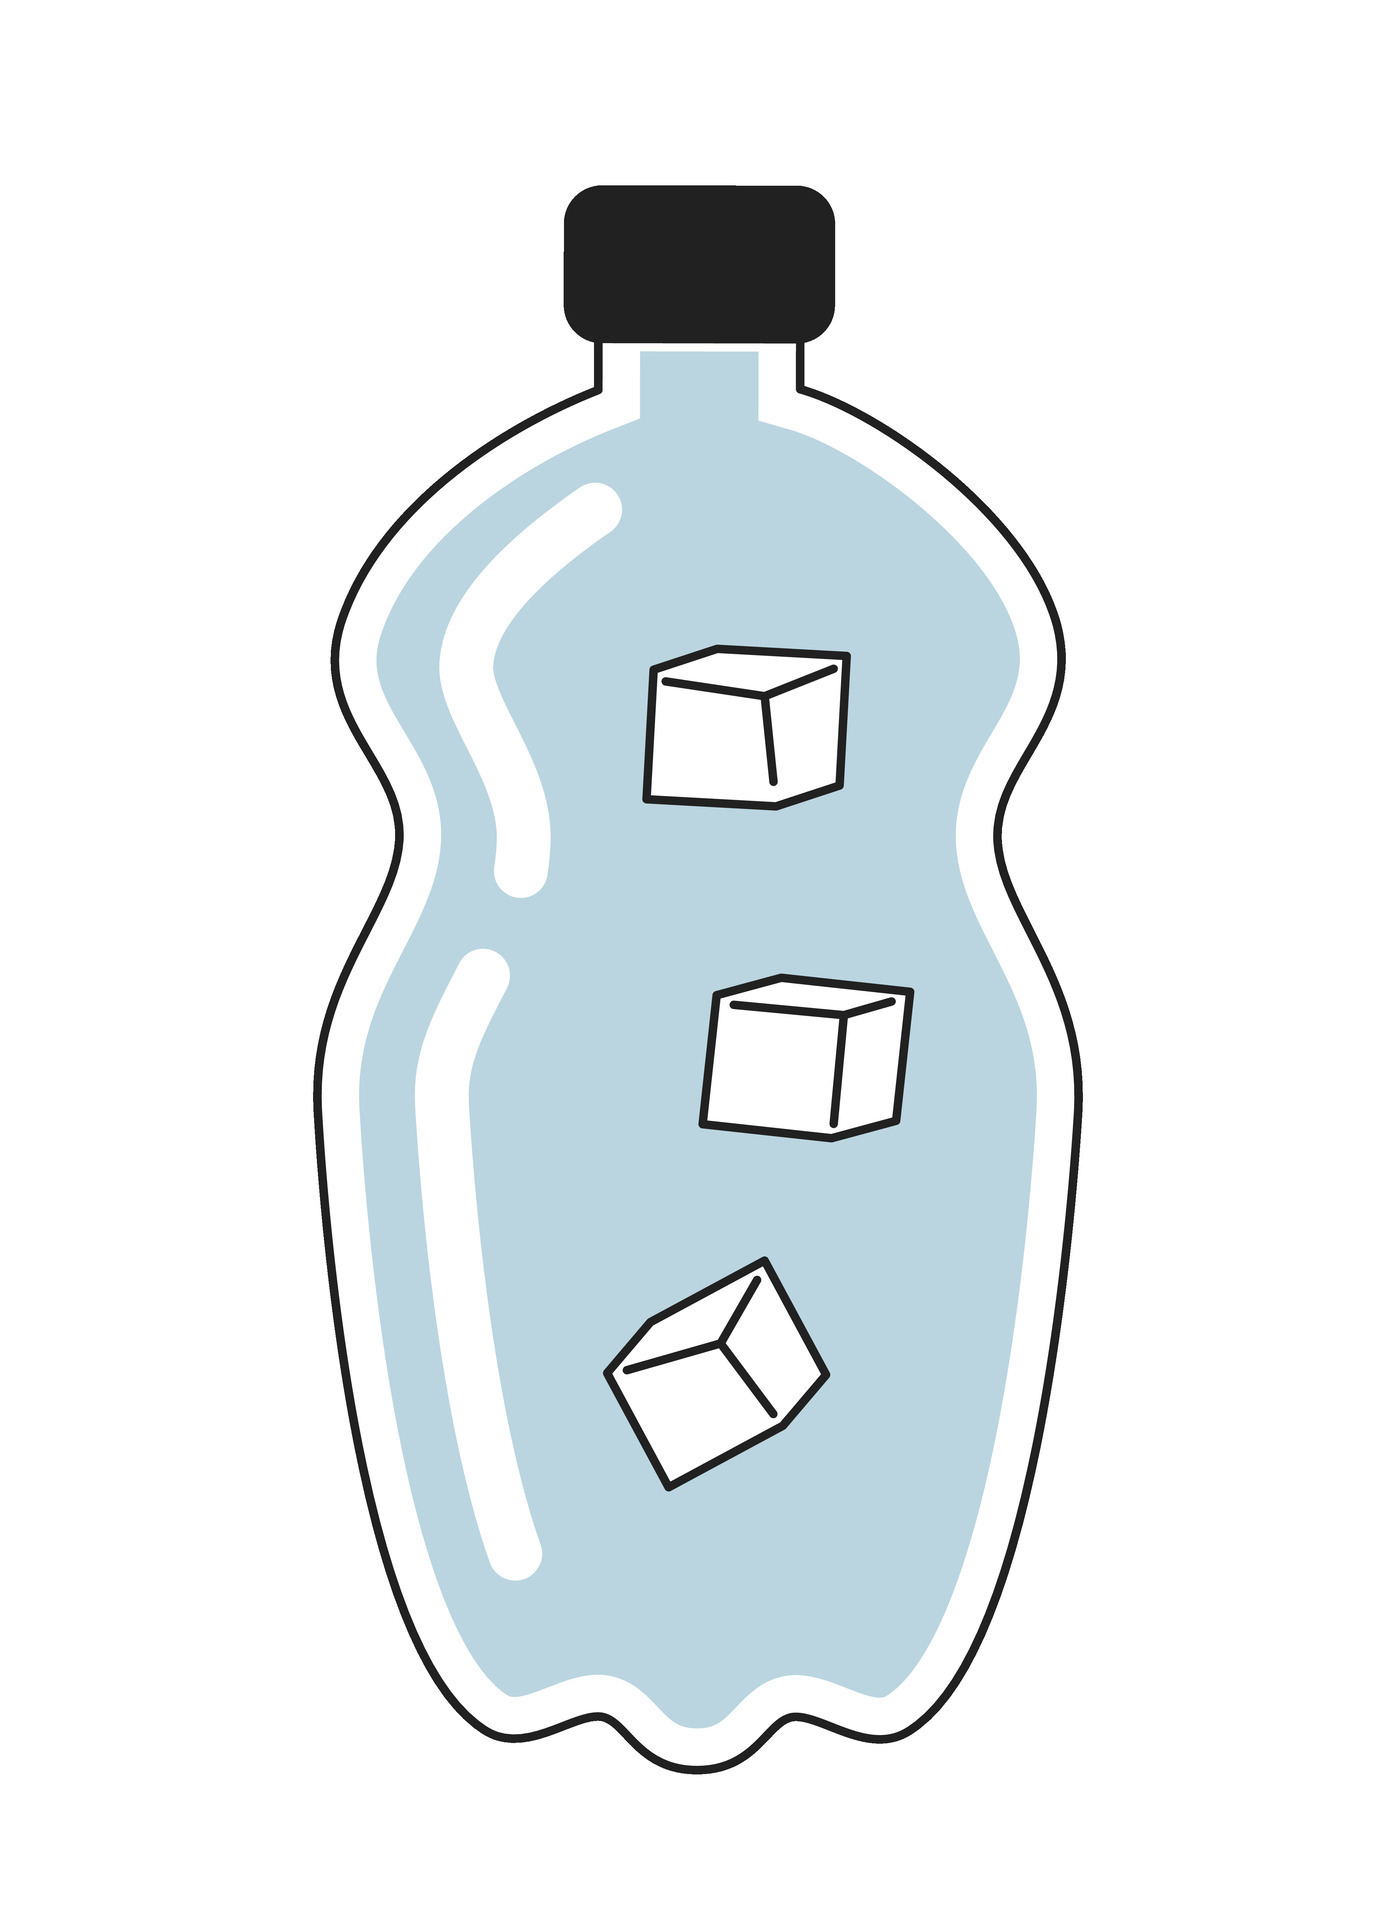 https://static.vecteezy.com/system/resources/previews/026/398/428/original/water-bottle-with-ice-cubes-monochrome-flat-object-mineral-water-for-summer-refresh-editable-black-and-white-thin-line-icon-simple-cartoon-clip-art-spot-illustration-for-web-graphic-design-vector.jpg